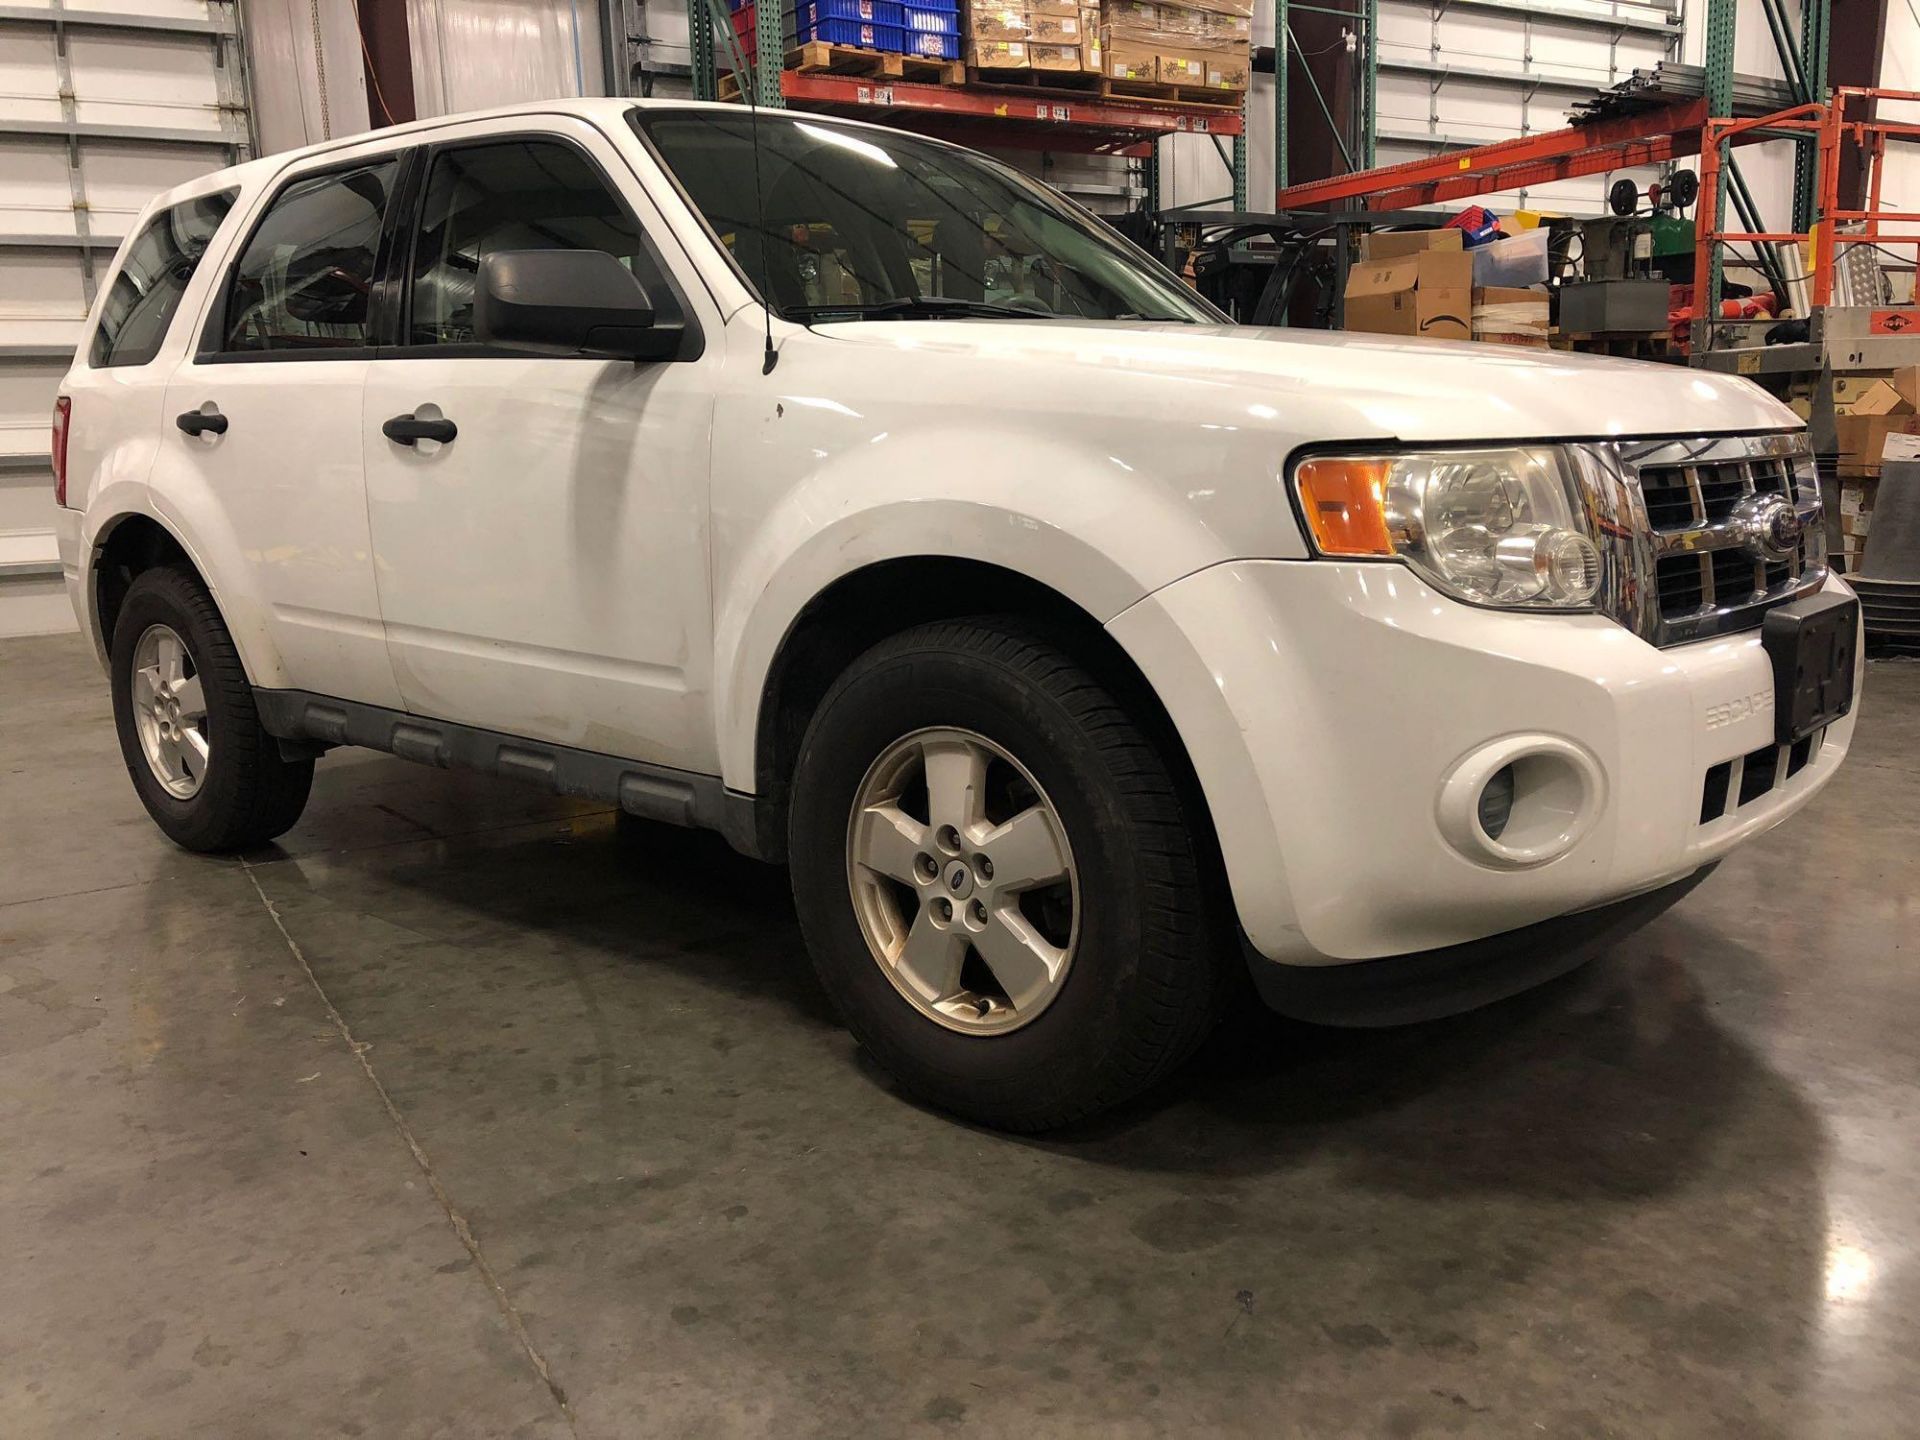 2010 FORD ESCAPE SUV, 4 DOOR, AUTOMATIC TRANSMISSION, RUNS - Image 5 of 17